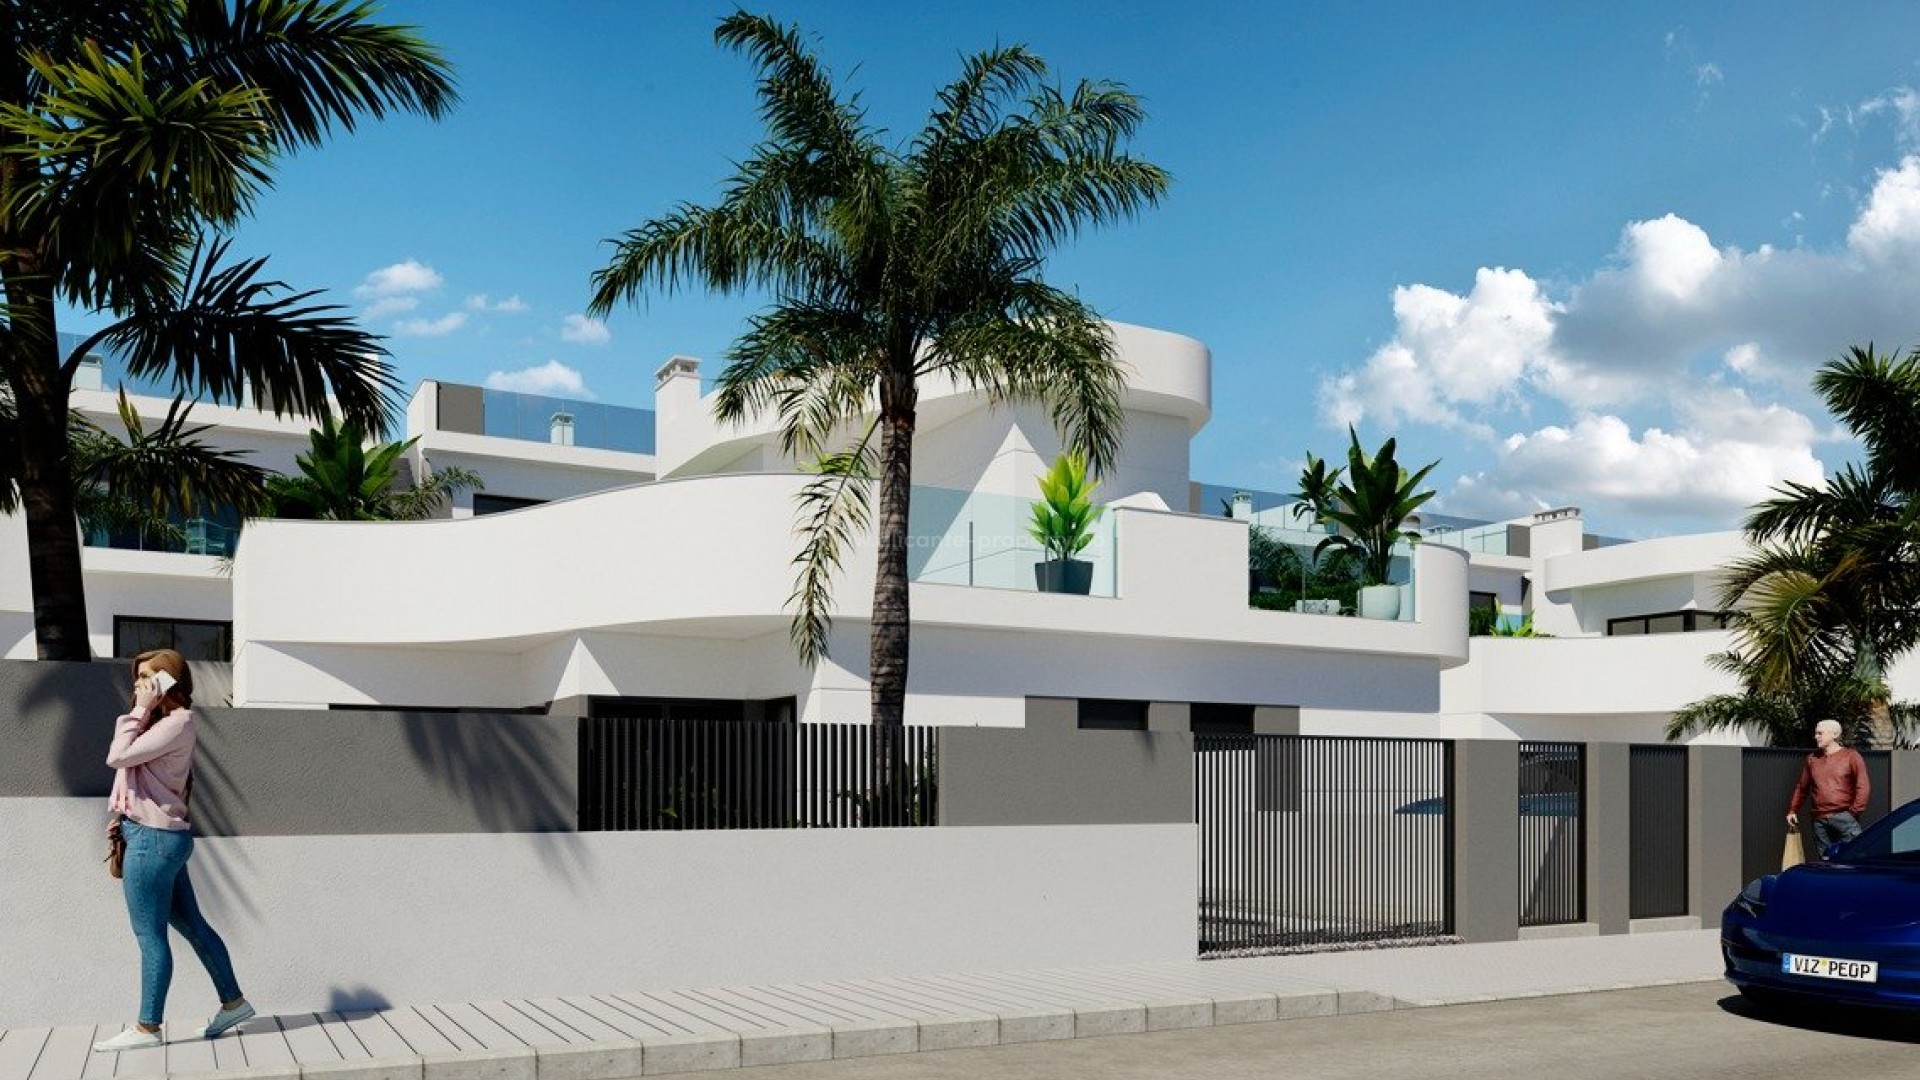 New built residential complex in Los Balcones, Torrevieja with semi-detached houses and bungalows, 3 bedrooms, 2 bathrooms, open plan kitchen with spacious living room, terrace.